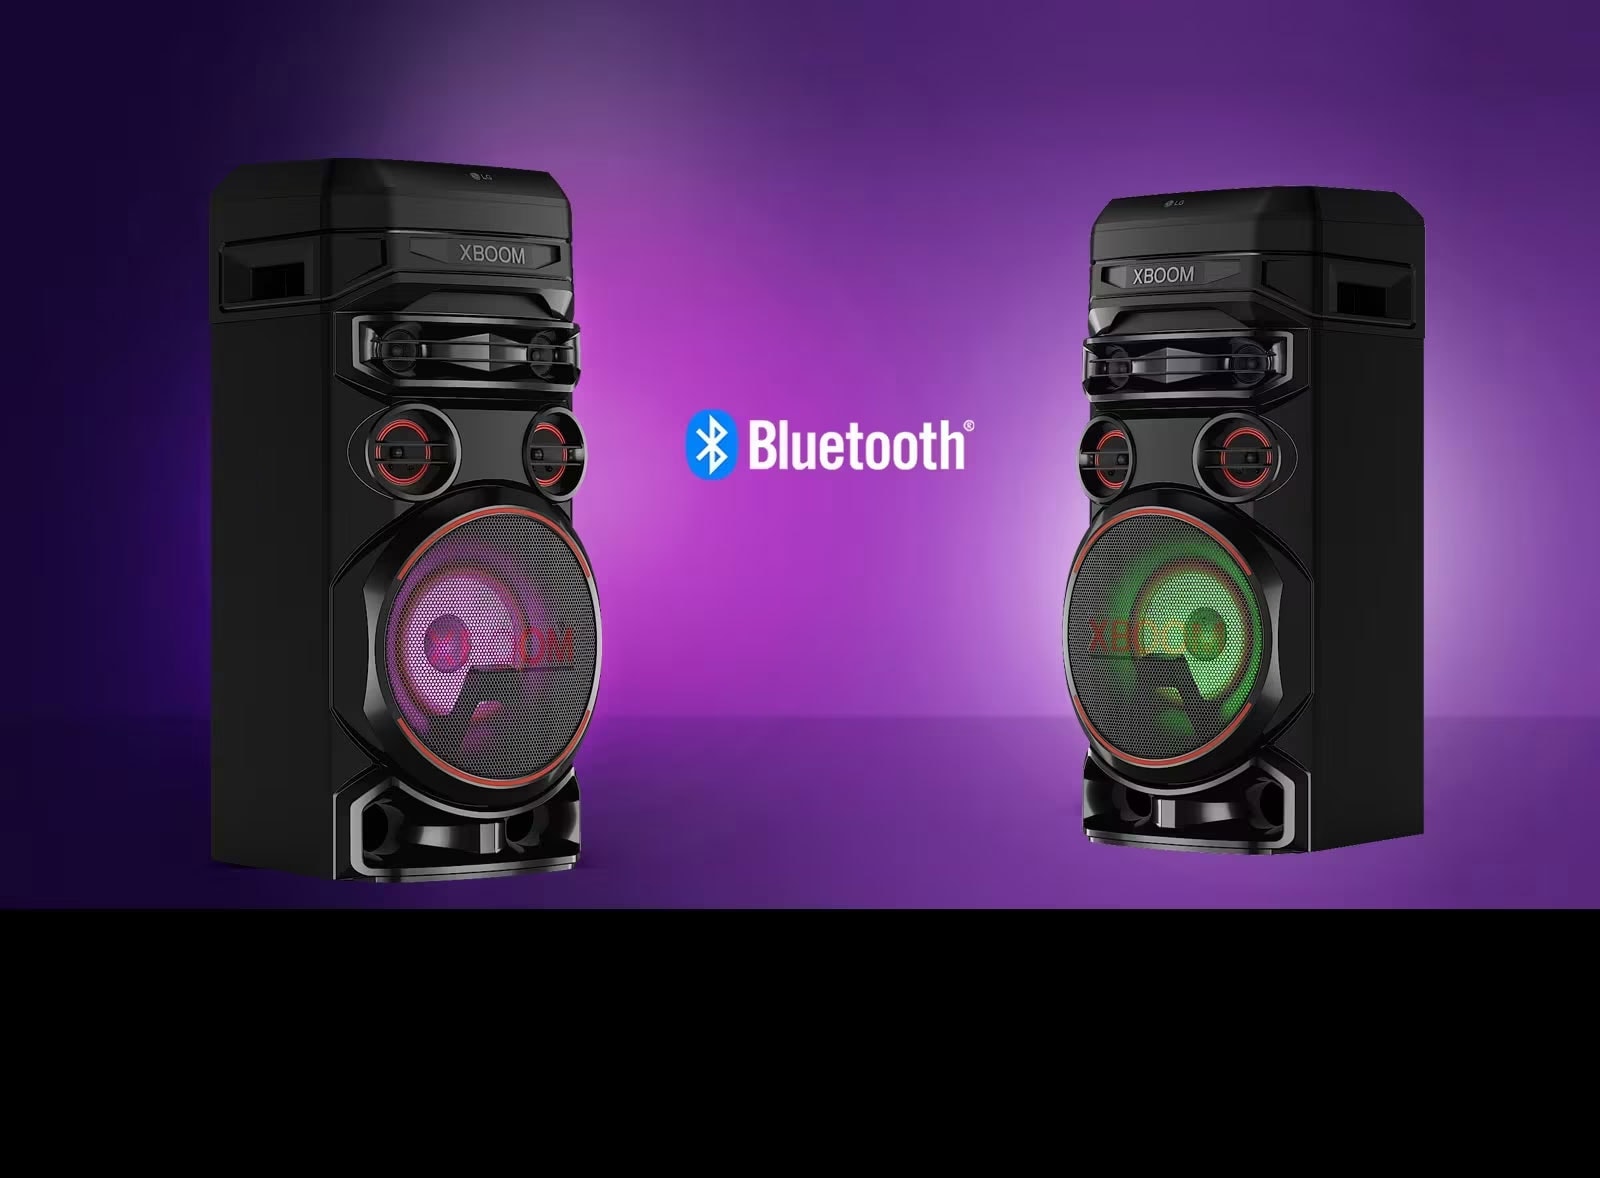 LG XBOOM RNC9 PARTY SPEAKER - MULTI BLUETOOTH, POWERFUL BASS, MIC AND  GUITAR INPUT